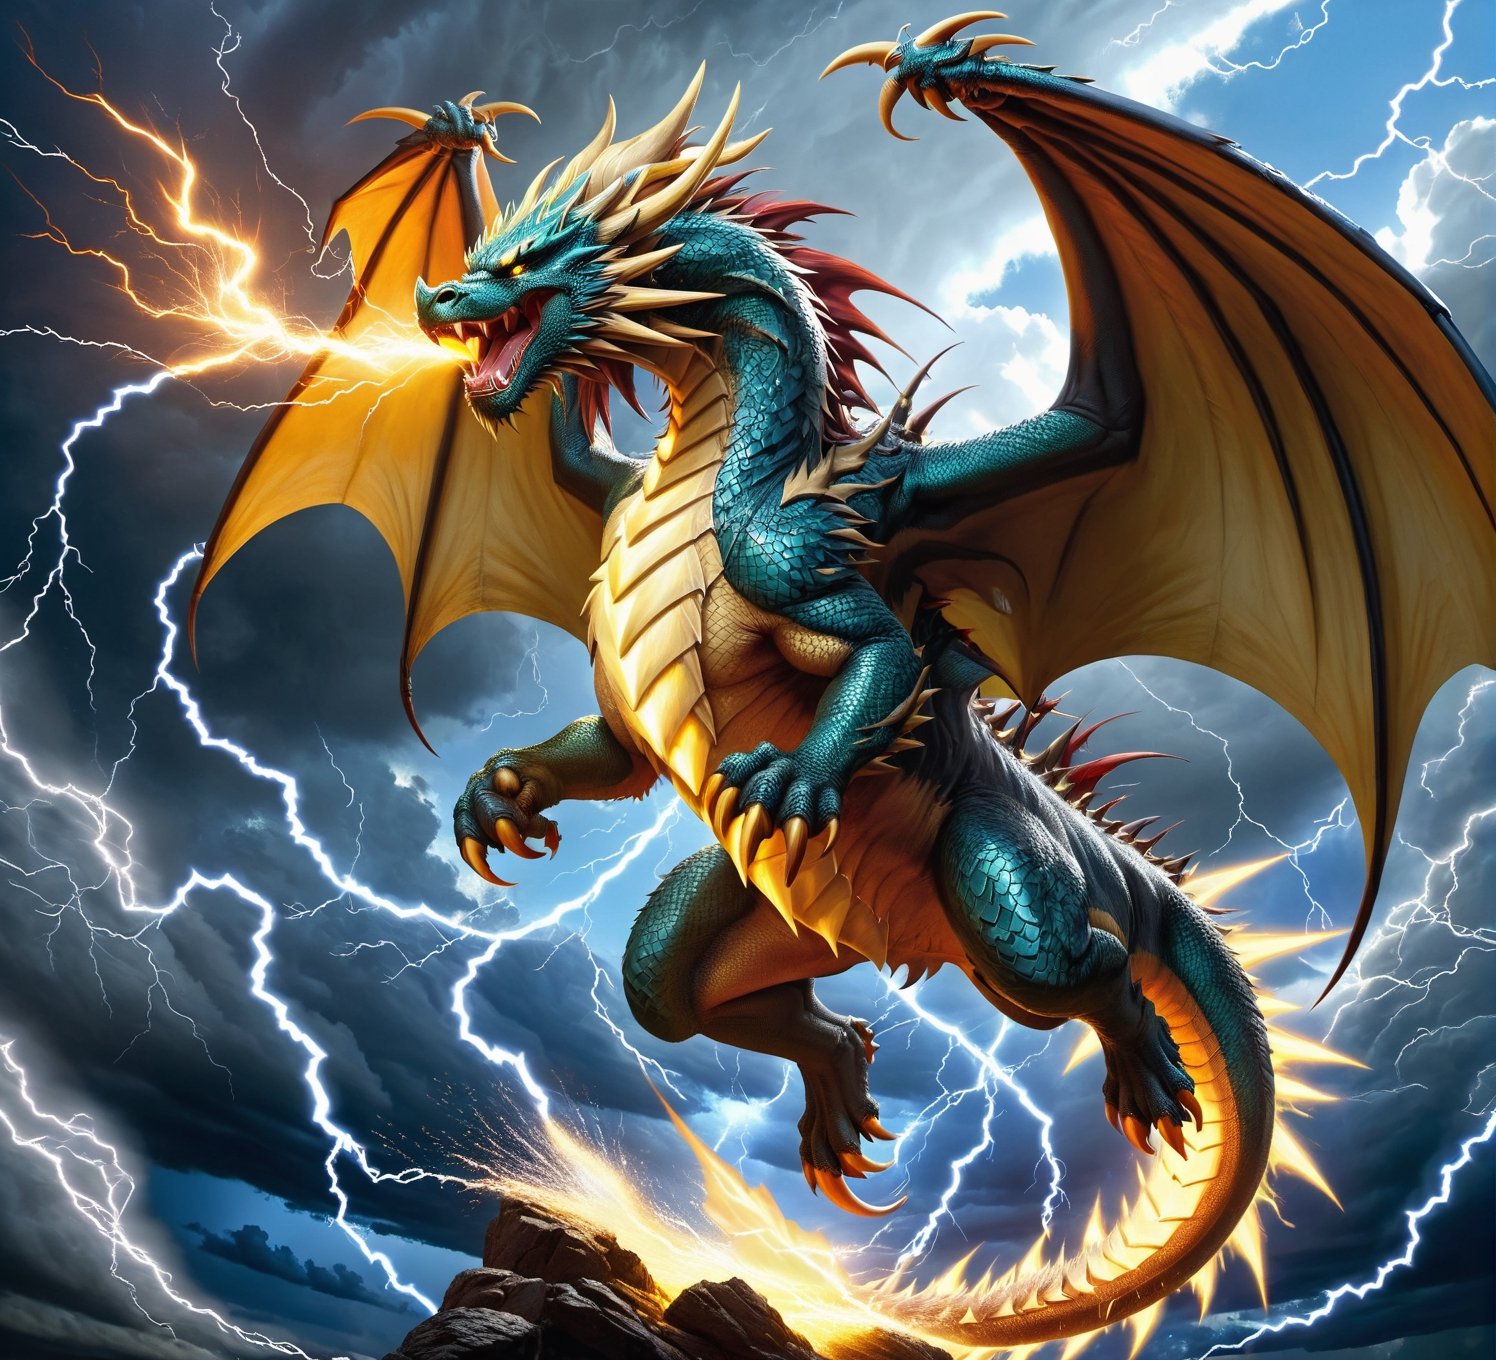 yellow lightning dragon,storm cloud,powerful storm,electricity,thunder,heavy rain,dark sky,roaring thunderbolts,strong wind,flashing light,bolts of lightning,ominous atmosphere,majestic creature,dark scales,sharp claws,fiery eyes,fierce expression,flying in the sky,spreading its wings,scaly texture,iridescent scales,twisted horns,serpentine body,glistening talons,spiky tail,gusts of wind,breathing fire,crackling energy,illuminating the darkness,dynamic movement,awe-inspiring presence,otherworldly creature,storm's fury,presiding over the storm,unleashing its power,unstoppable force,battle between nature's elements,breathtaking scene,mesmerizing spectacle,able to control the storm,majestic beauty,raw power,creating chaos with every movement,violent rumbles,unpredictable nature,symbol of strength and power,clash of nature's might,artistically rendered,high-res masterpiece,bold colors and contrasts,vivid and intense hues,dramatic lighting,creating a sense of awe and wonder.